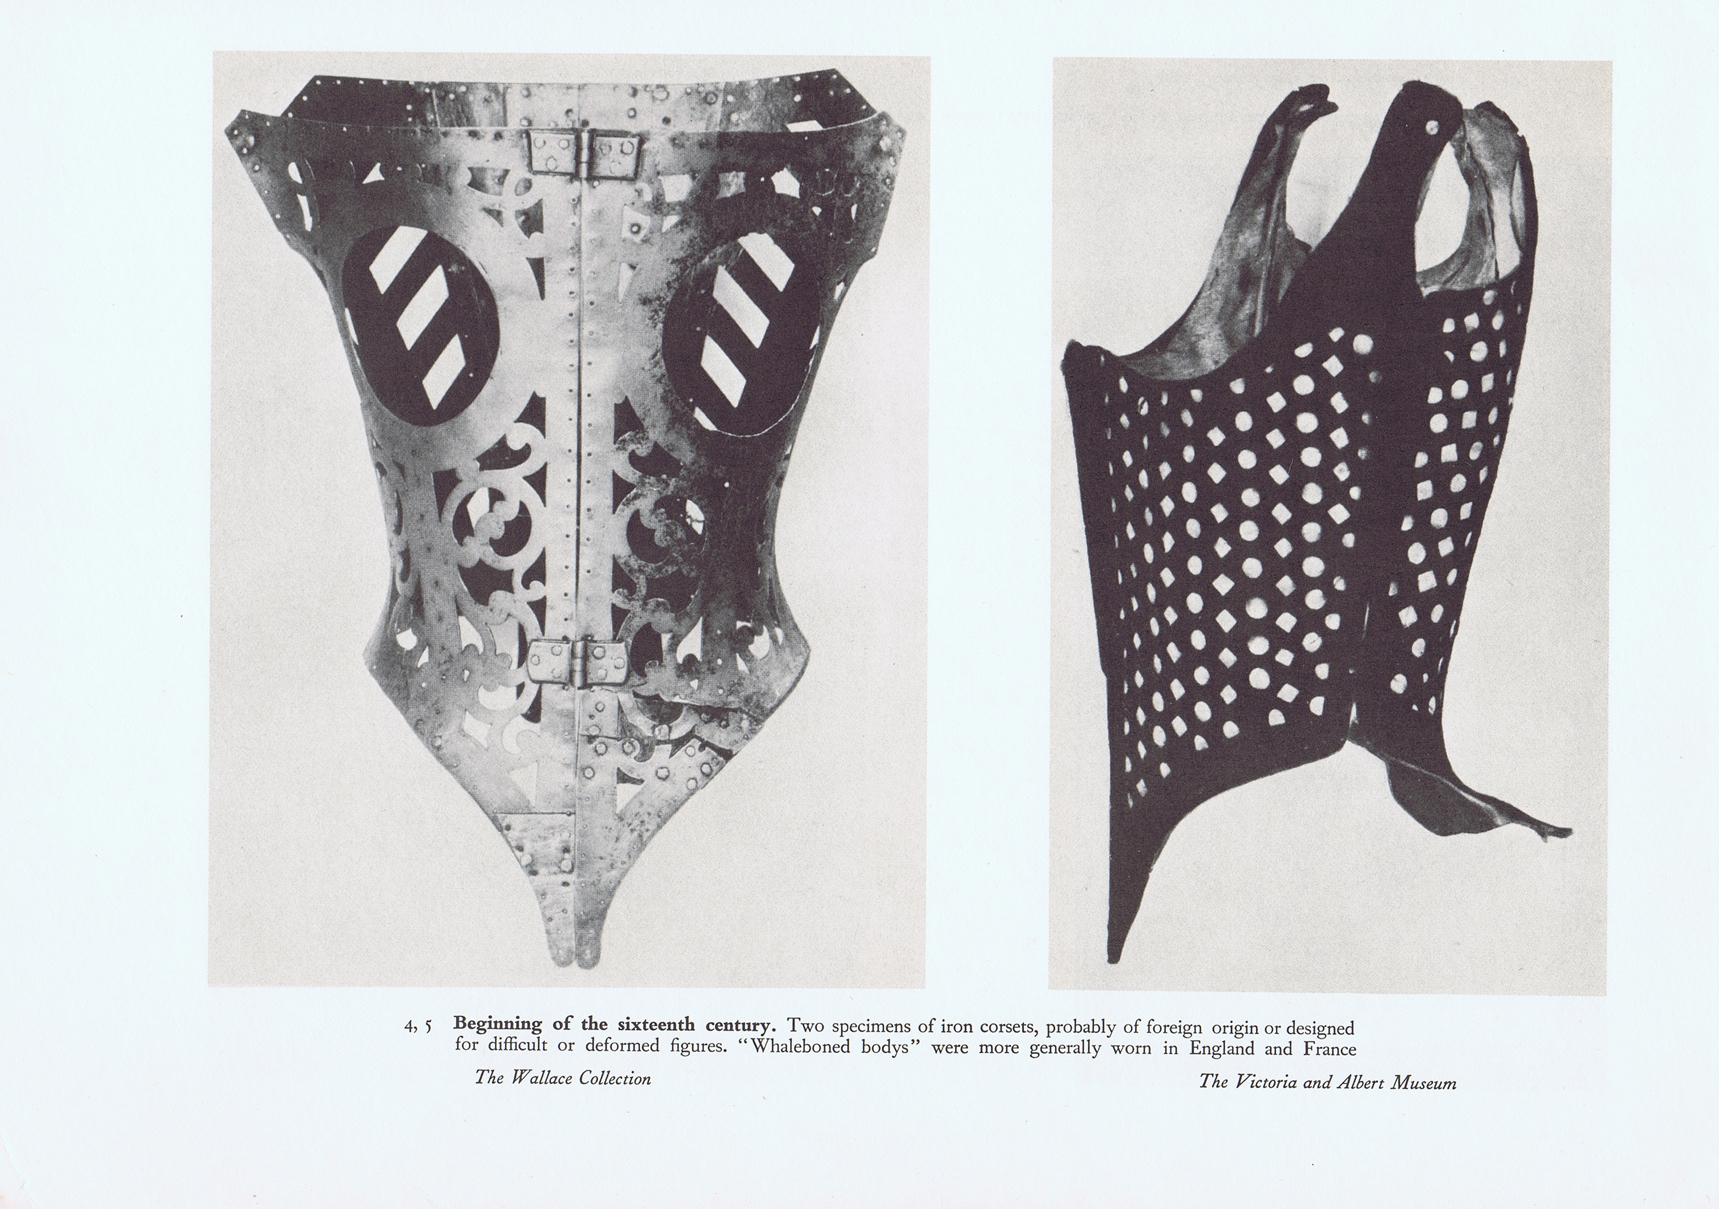 These contraptions were made of layers upon layers of fabric and hardened glue and/or steel cages well into the 16th century. The steel ones are thought to be more for orthopedic reasons than fashion but still neat none the less. This style was used to turn the upper torso into an inverted cone shape and used a farthingale (hoop skirt) to exaggerate the hips.